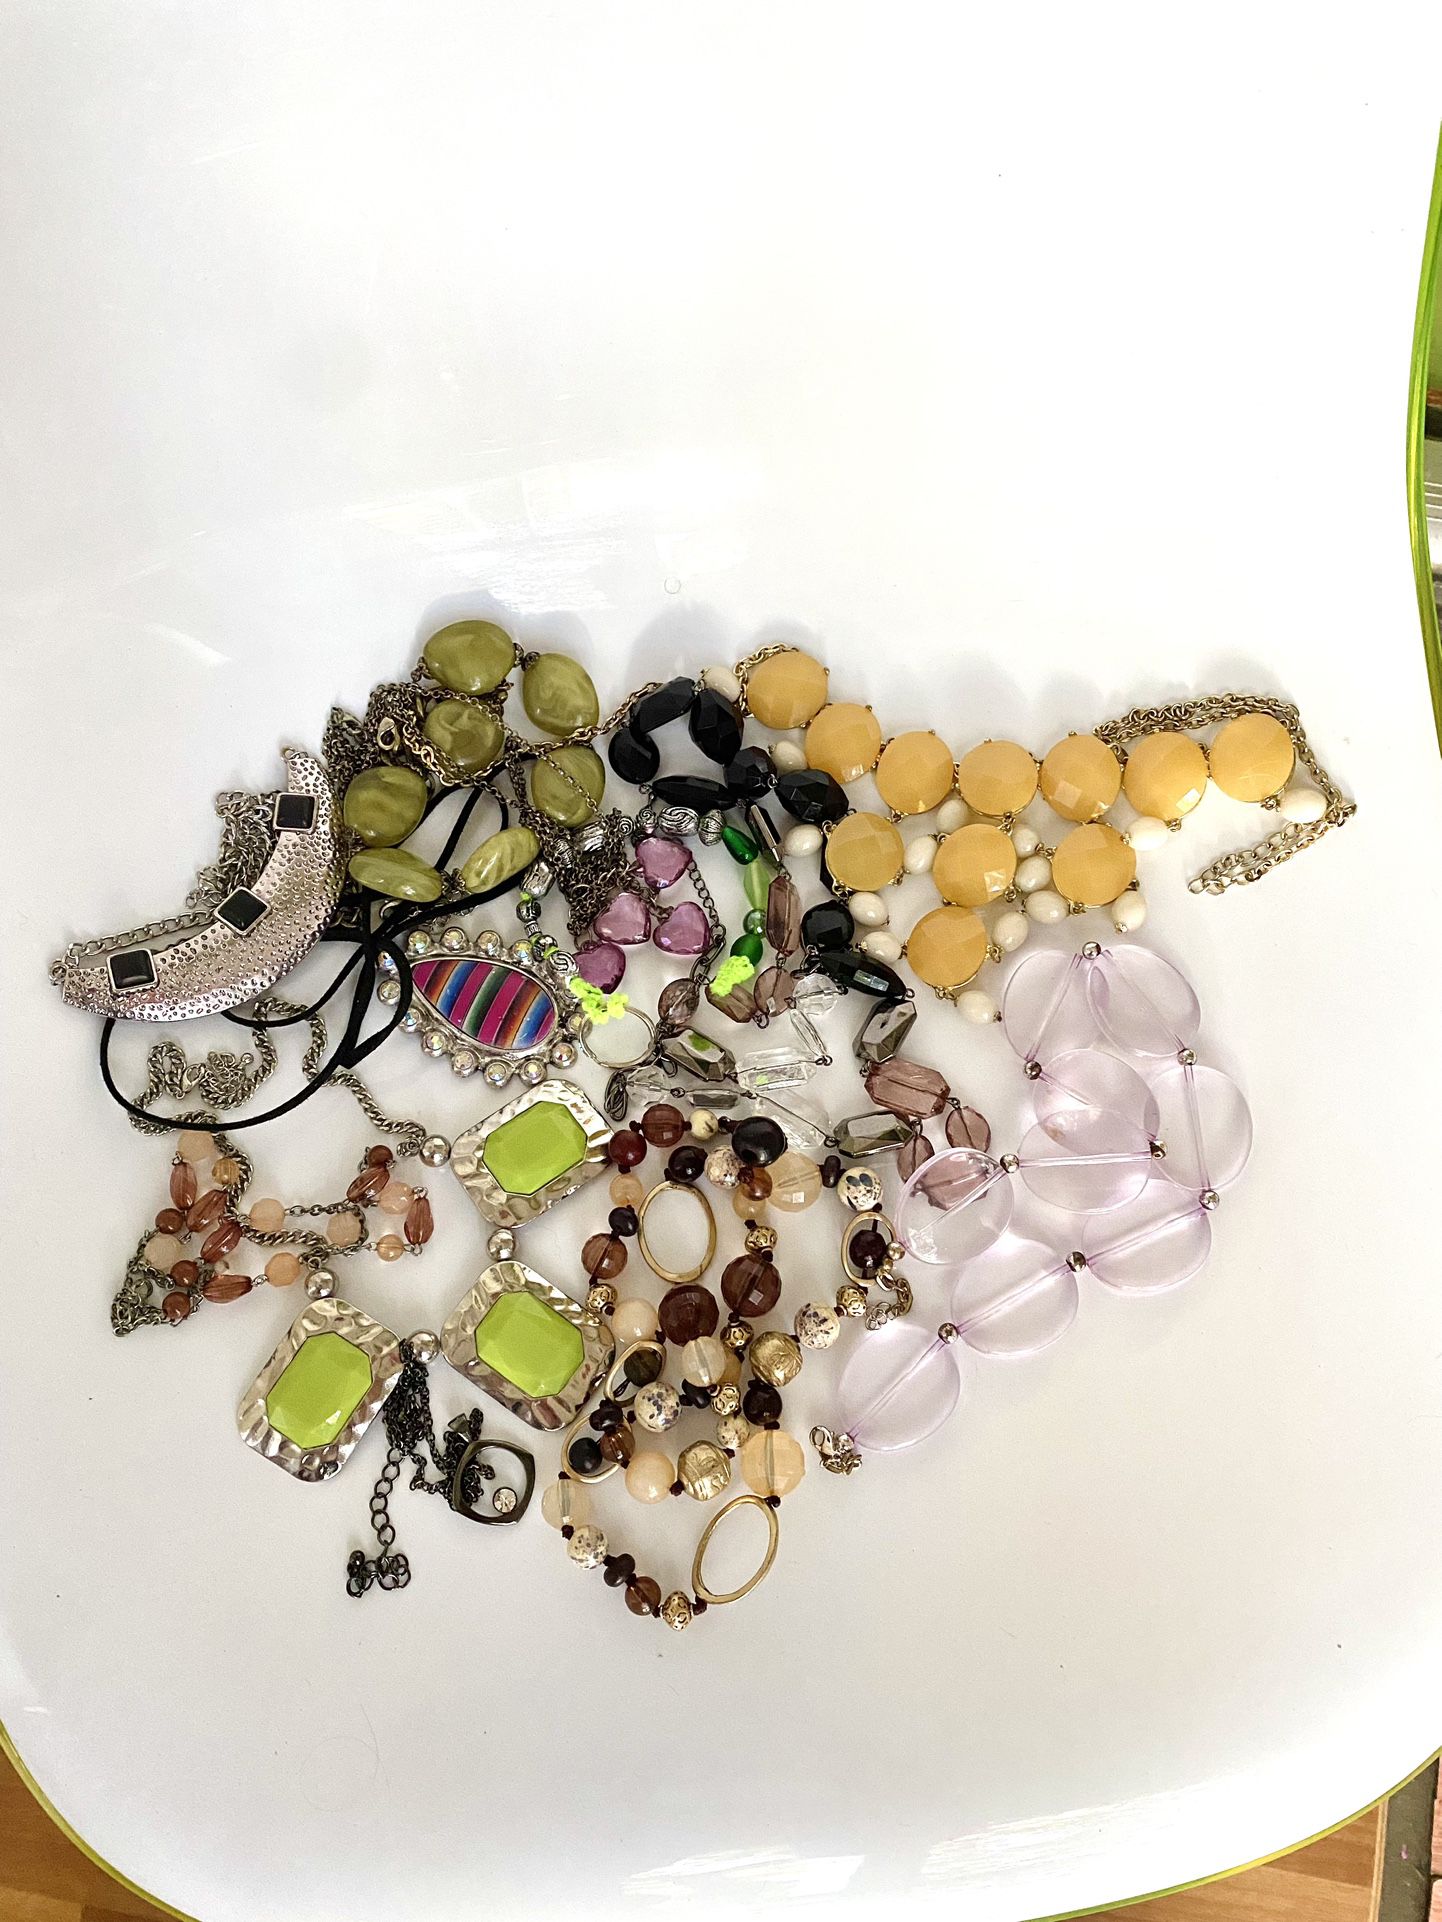 Jewelry Bag of 11 Necklaces and Keychain. Undamaged! Gold & Silver Tone Chains. Prom Wedding Birthday Party Cocktail. Super Sale! $20 All!